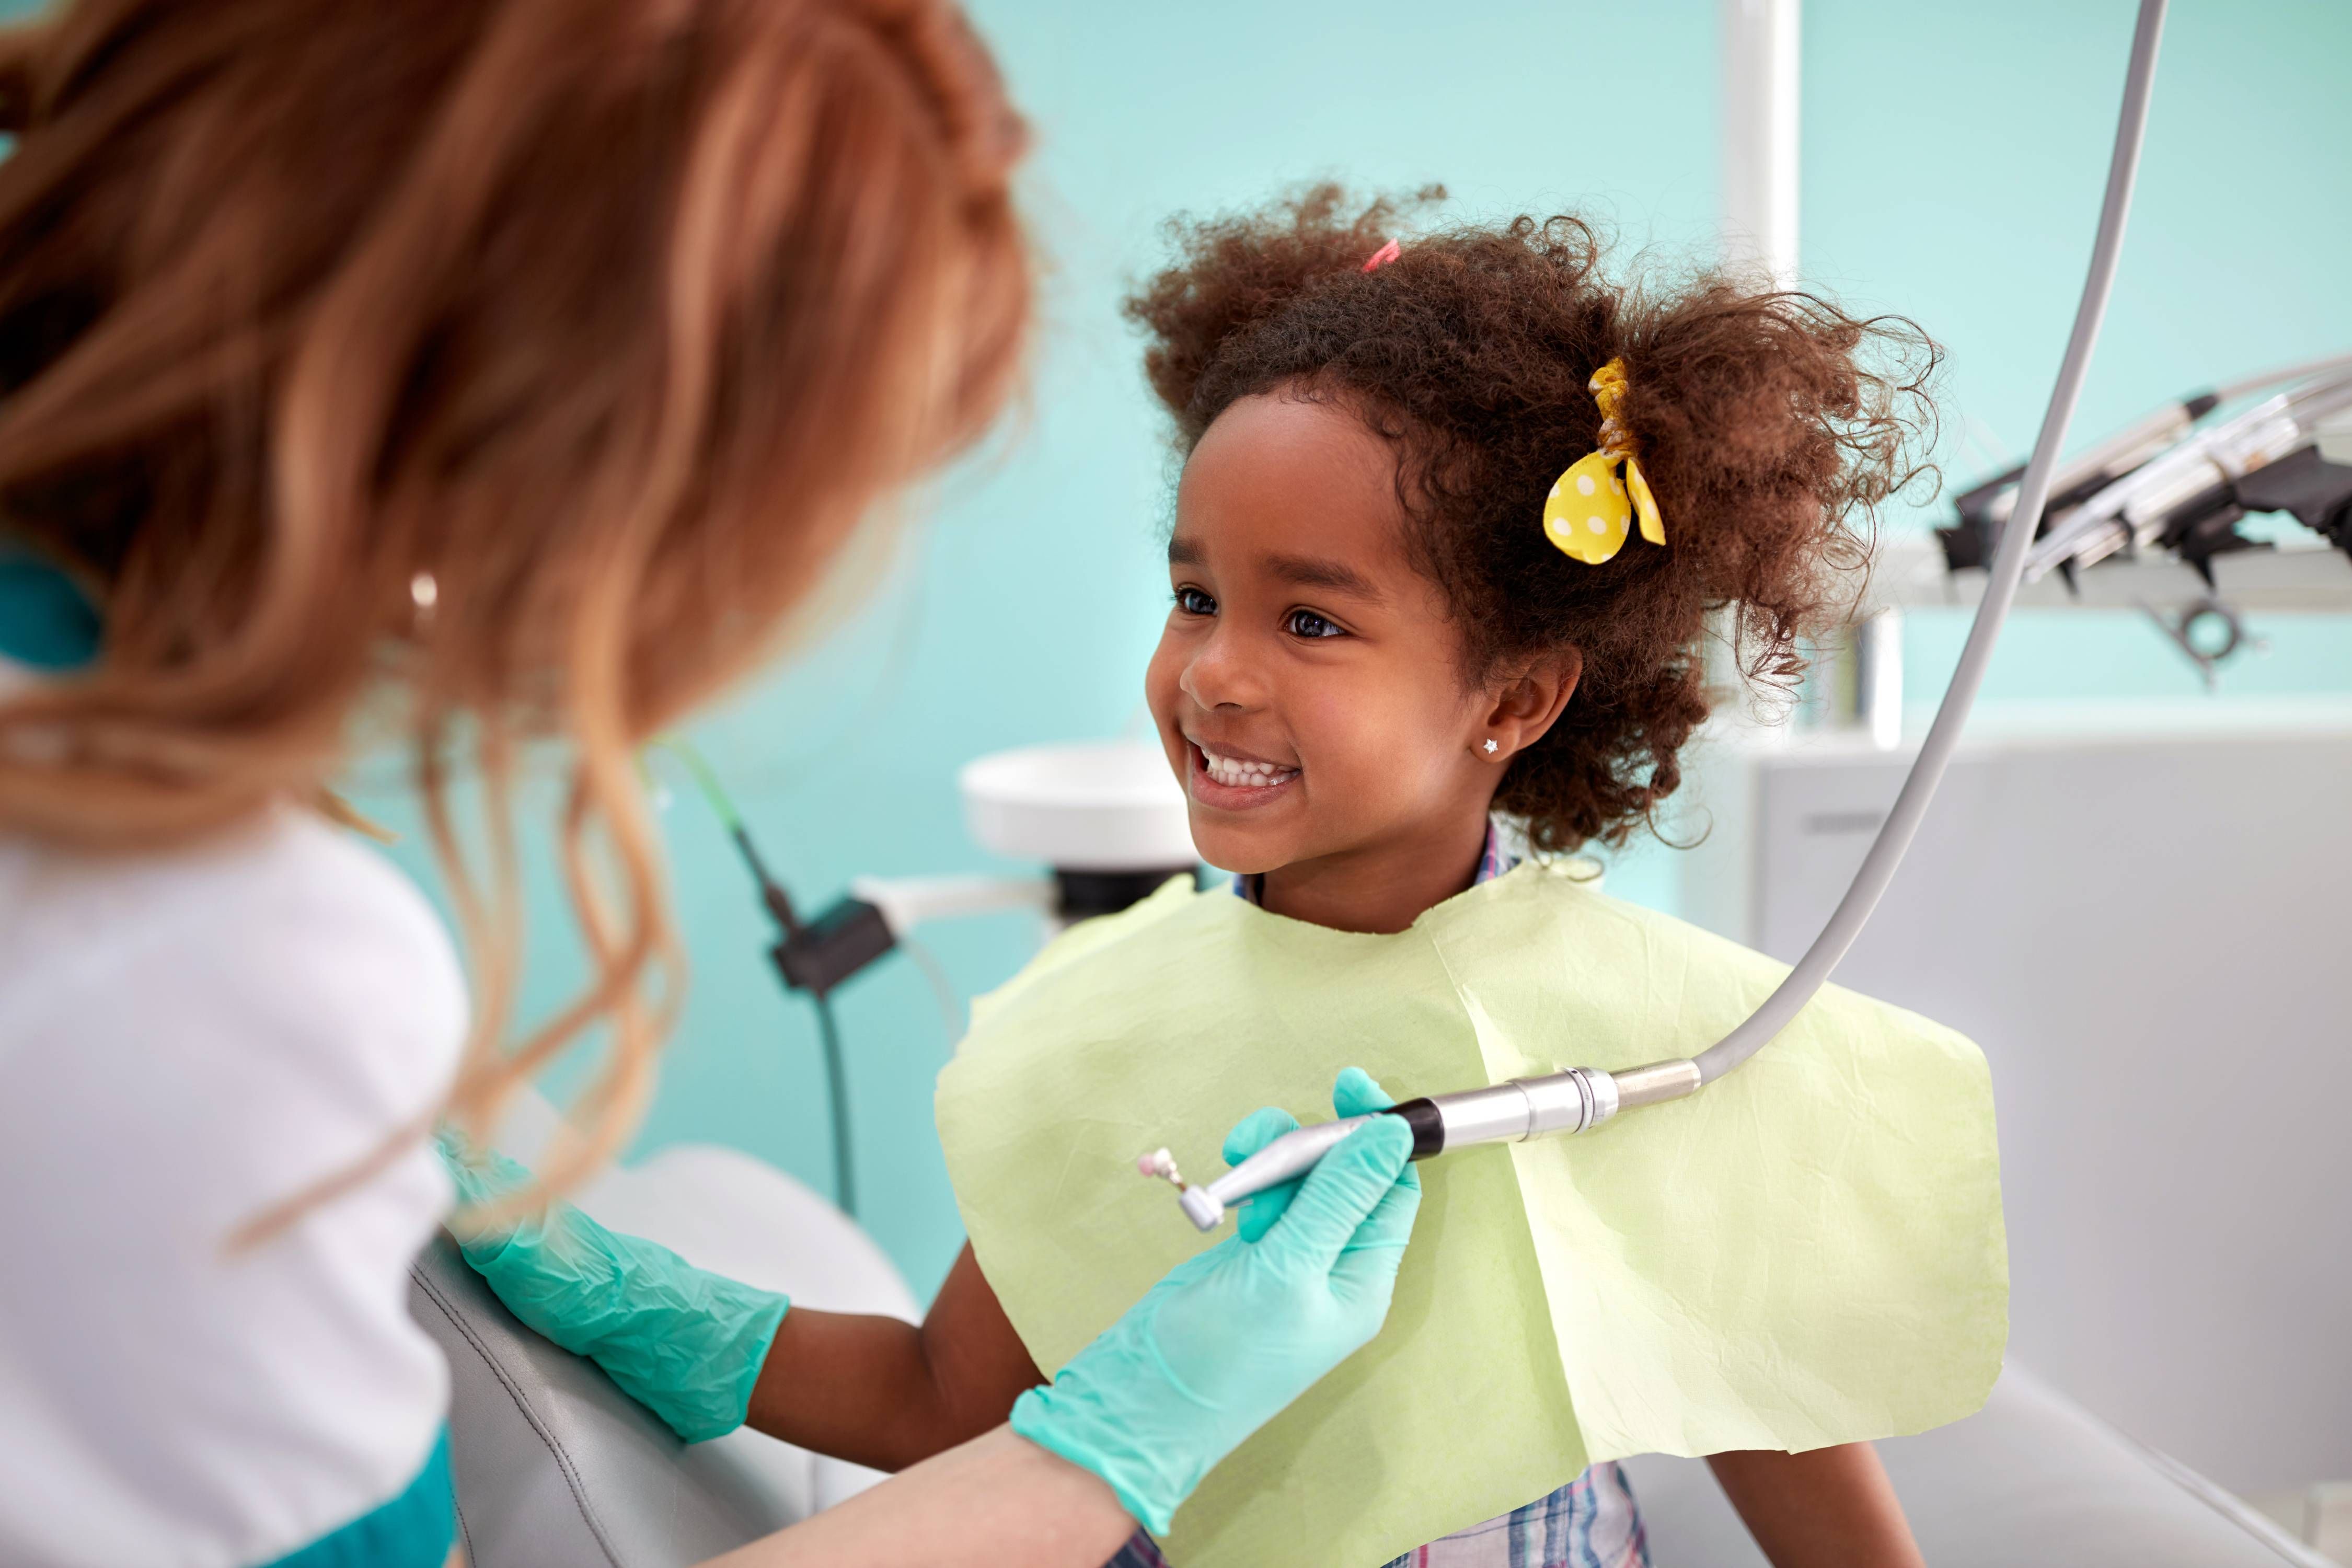 Benefits of Taking Your Child to a Pediatric Dentist (Rather Than a General Dentist)